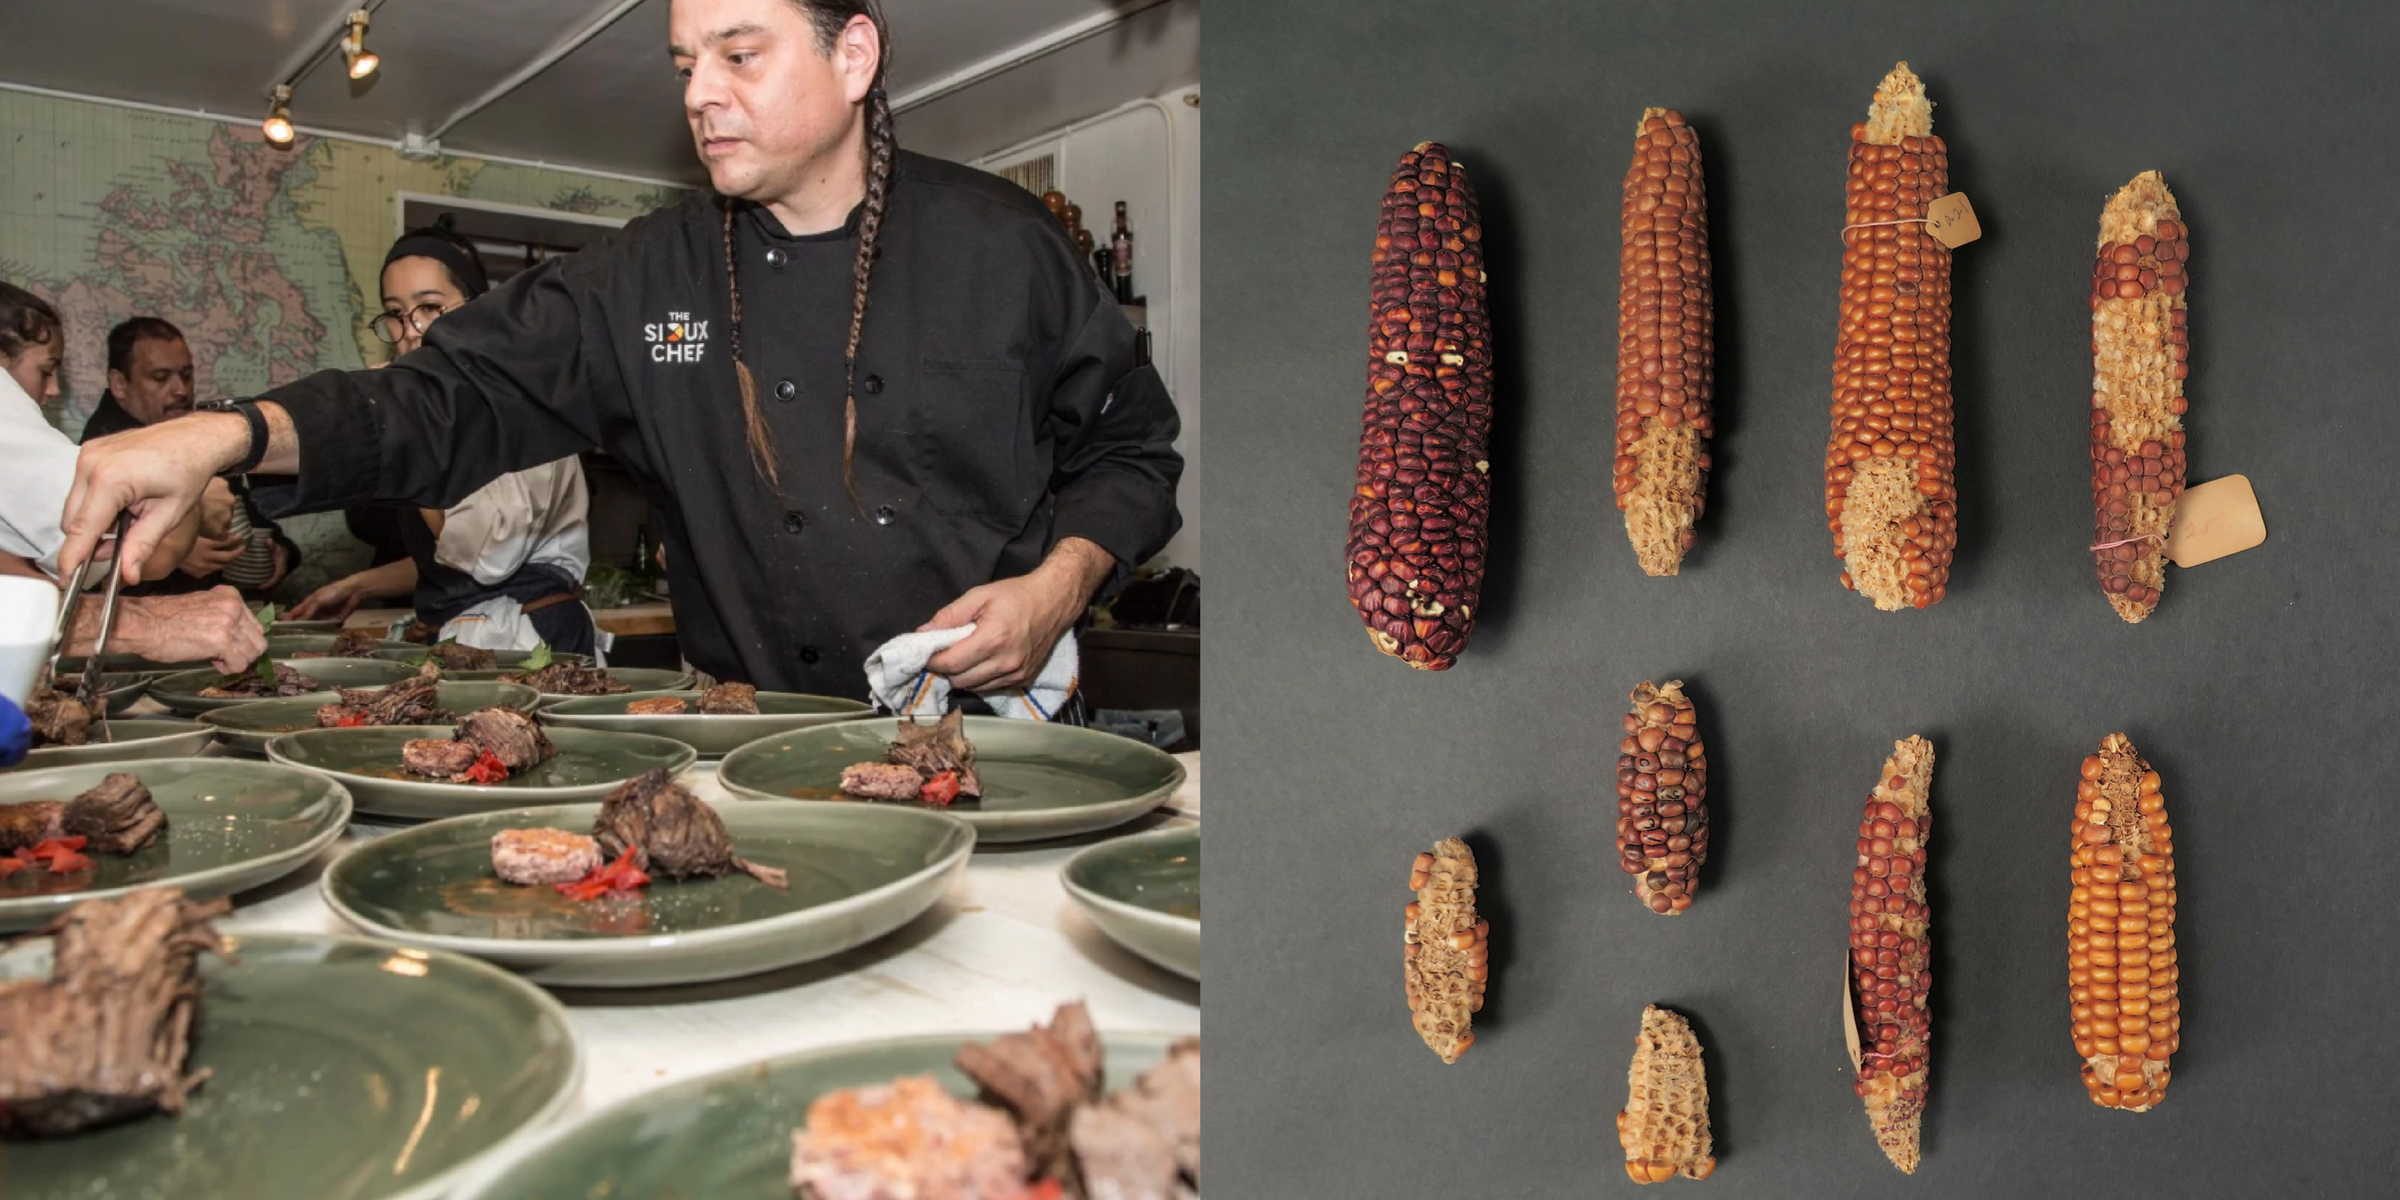 Two images, one of a man with braids in a chef's coat plating several identical dishes; and several cobs of corn of different colors laid out flat. Sean Sherman by Rina Oh for the James Beard Foundation. Corn cobs from Cottonwood Canyon, Utah, in the Museum's collection.